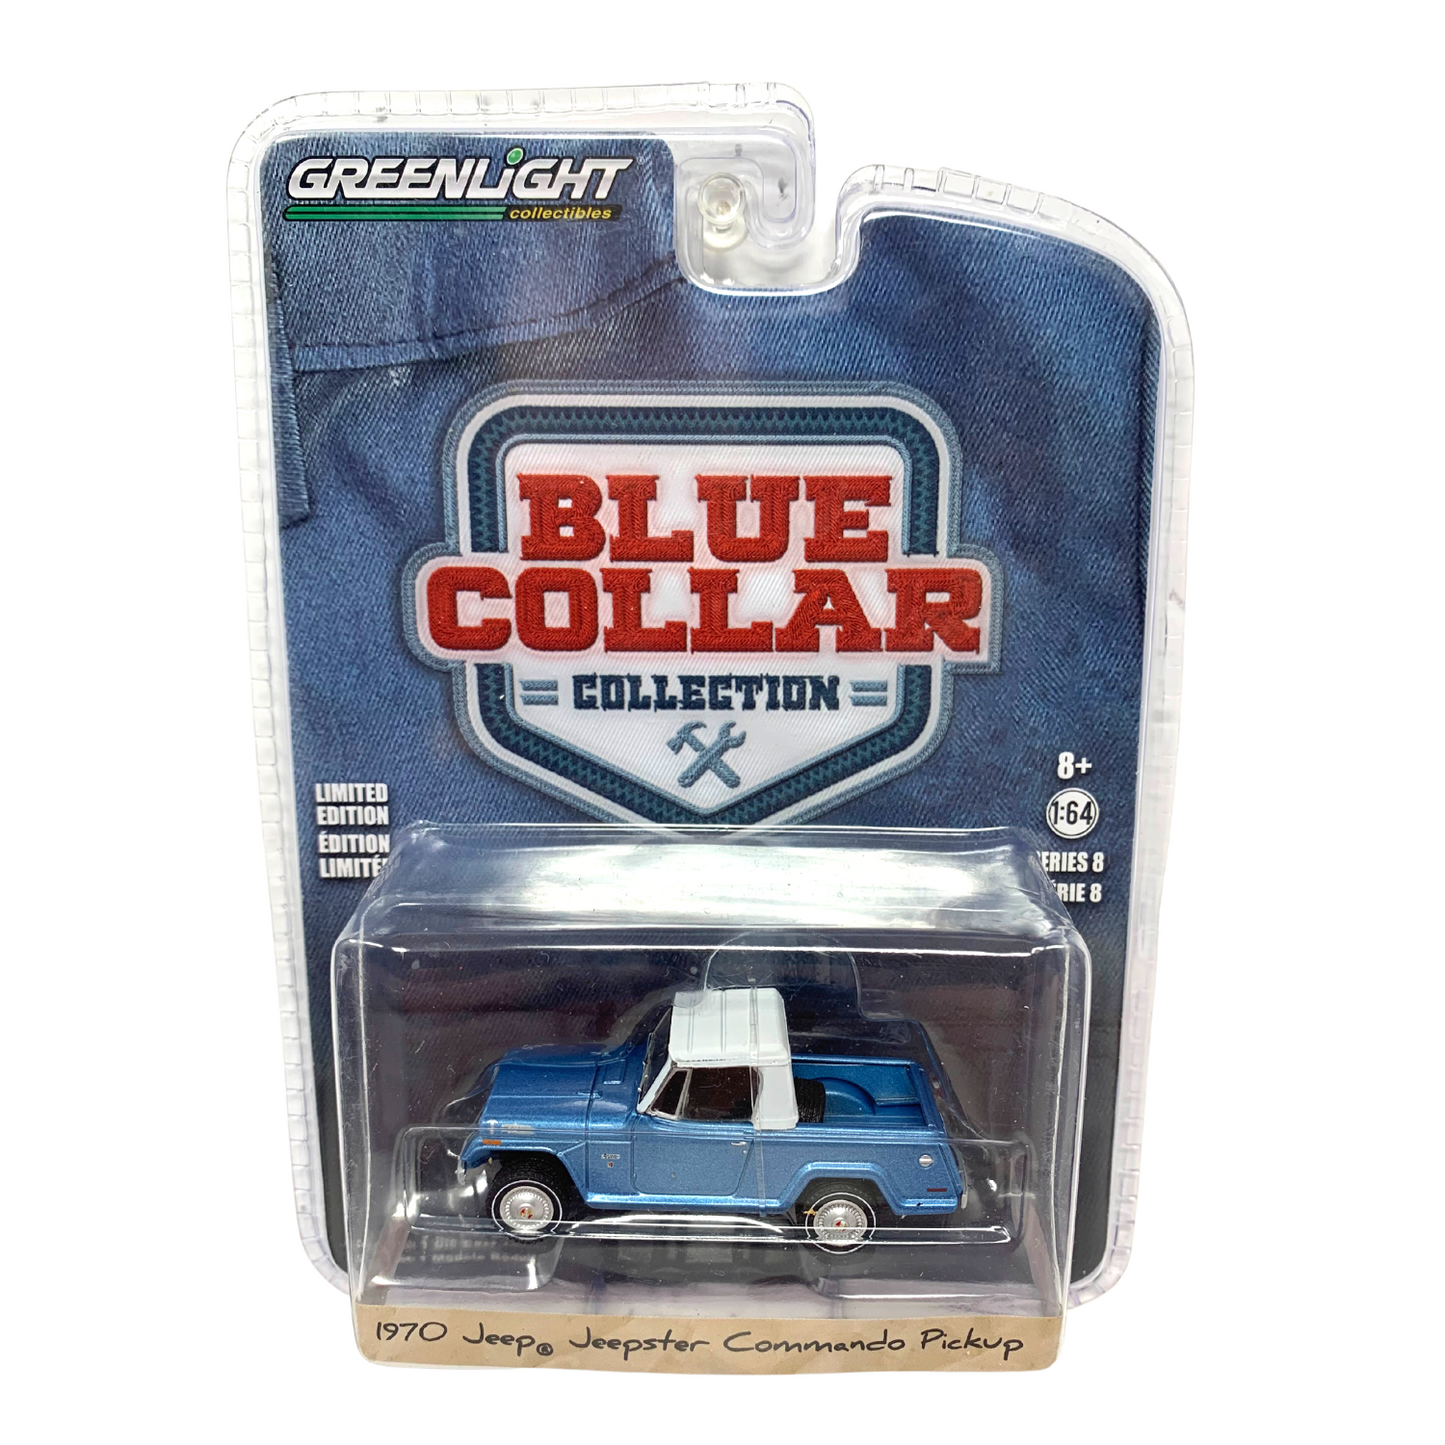 Greenlight Blue Collar Collection 1970 Jeep Jeepster Commando 1:64 Diecast